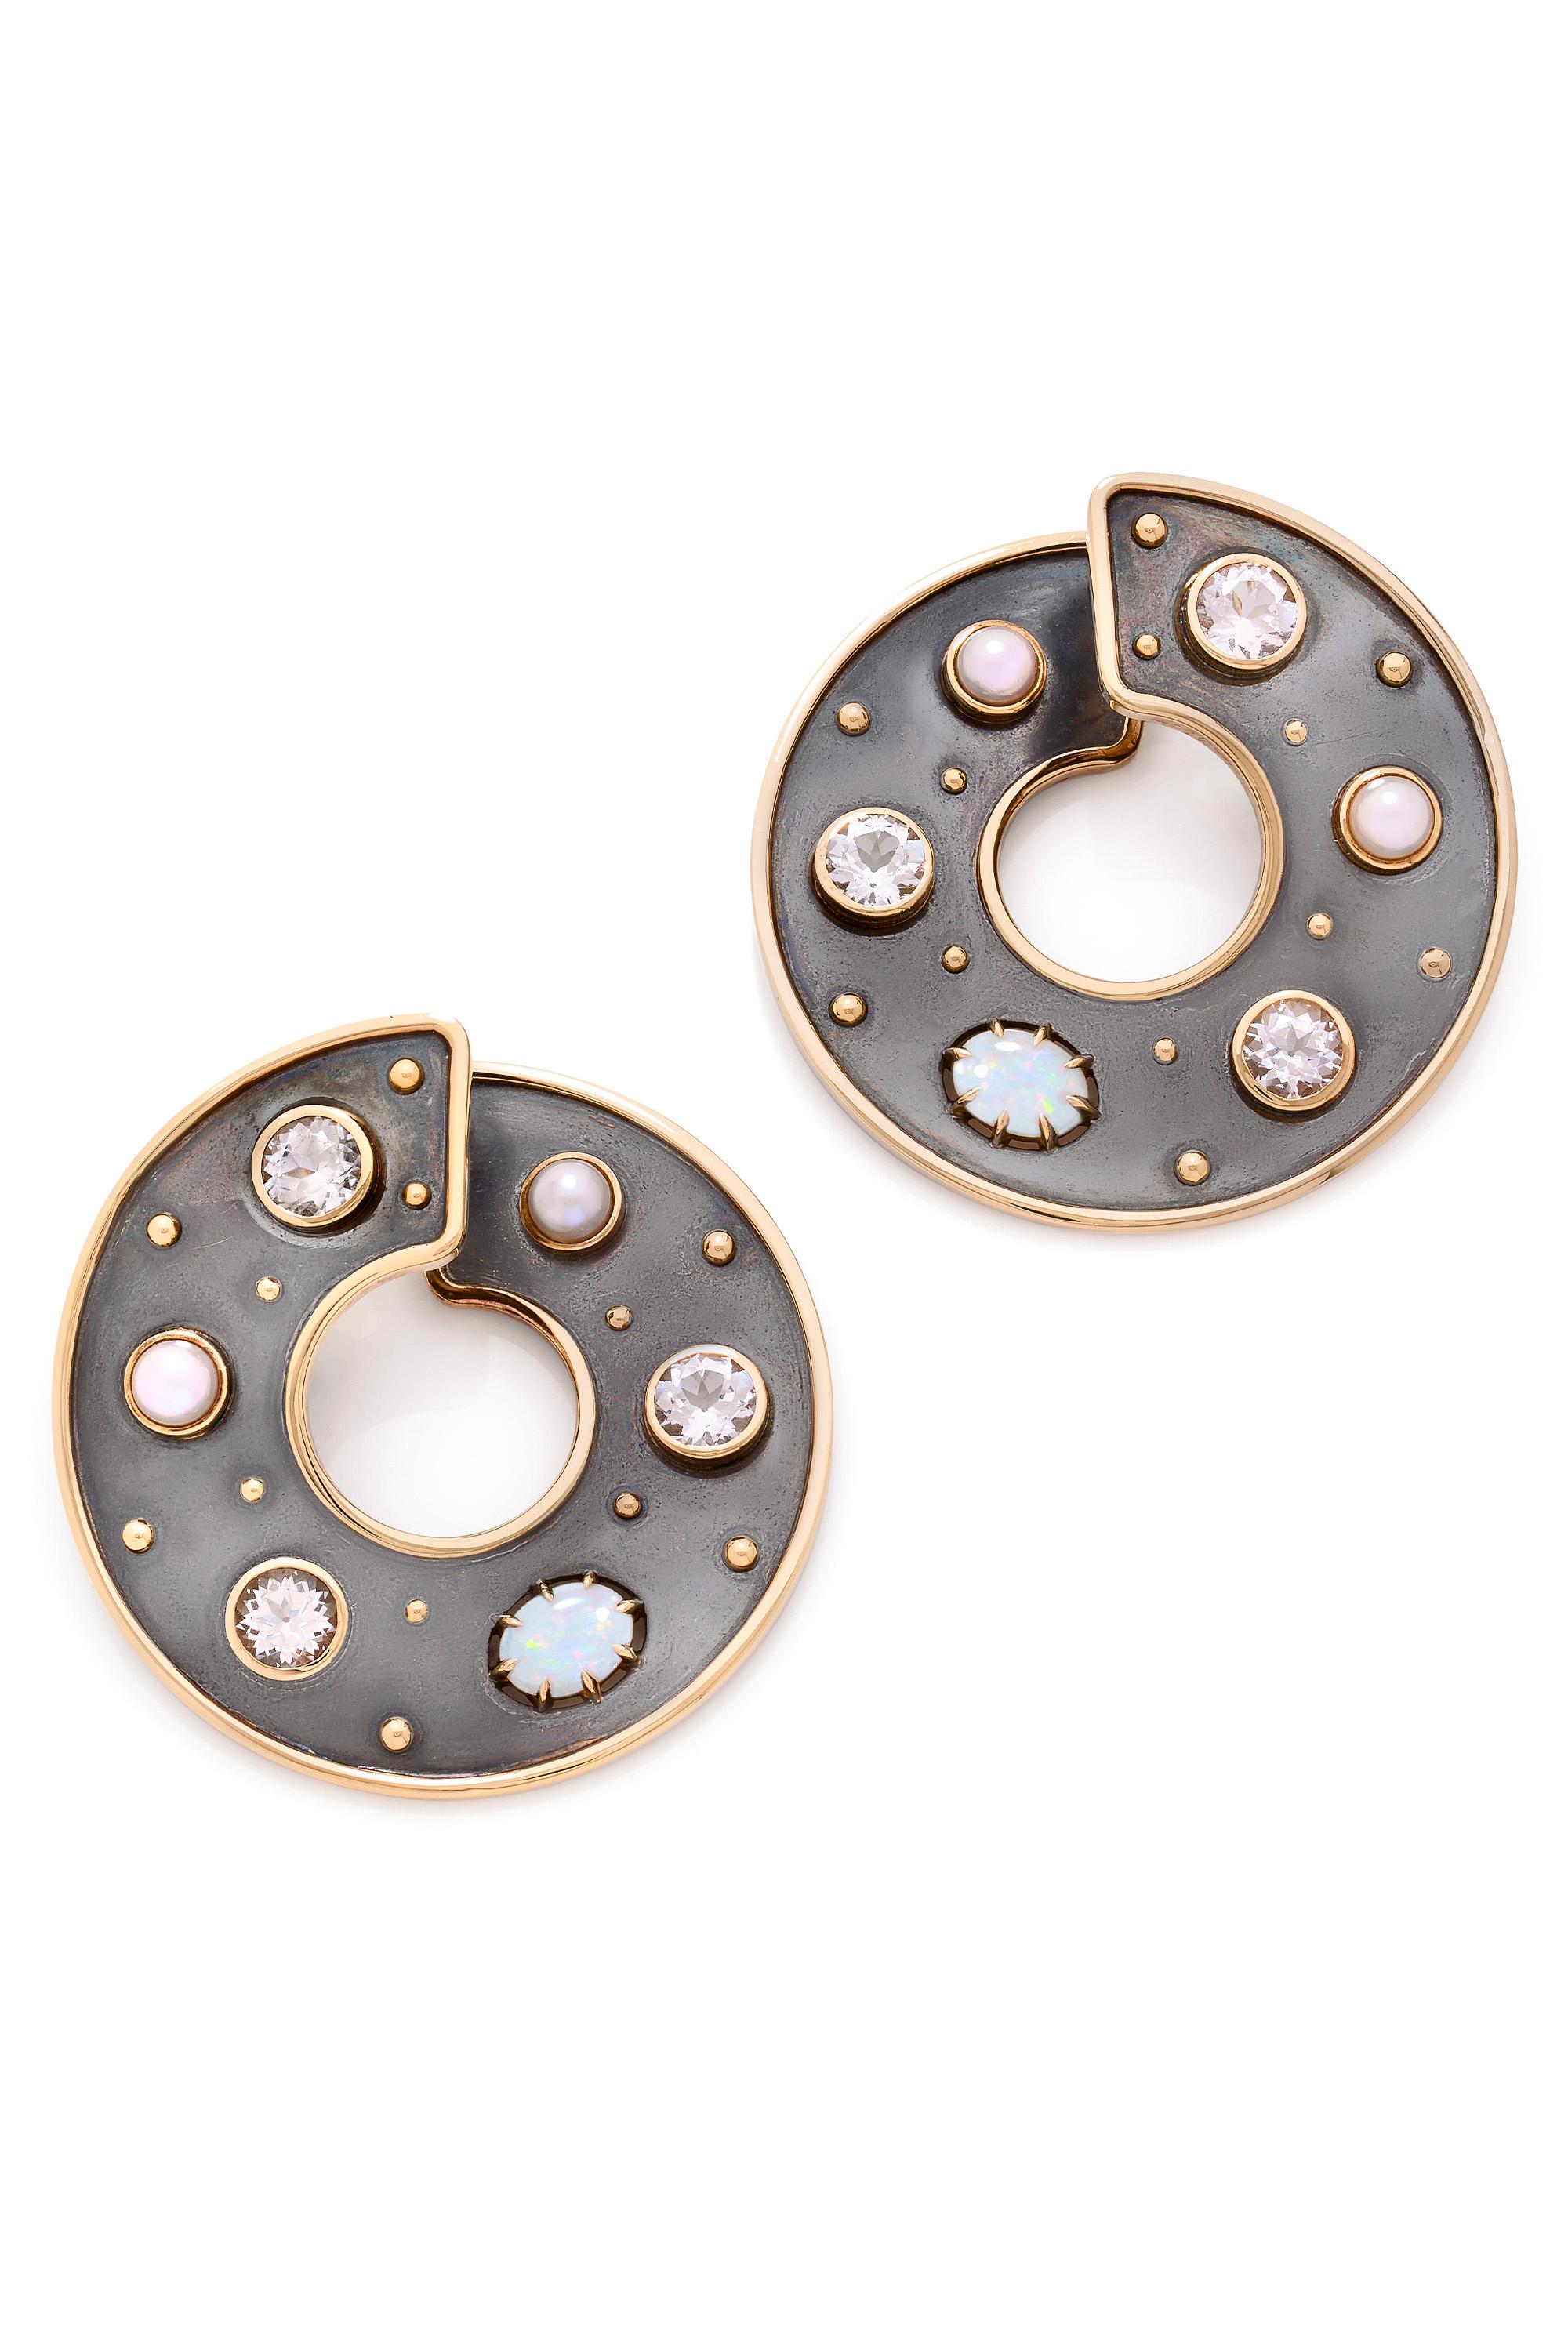 Yellow gold and distressed silver clip-on earrings, studded with Opals akoya pearls and white topazes.

Details:
Opal, Topaz and Akoya Pearls    
18k Yellow Gold: 23 g 
Distressed Silver: 23 g 
Made in France